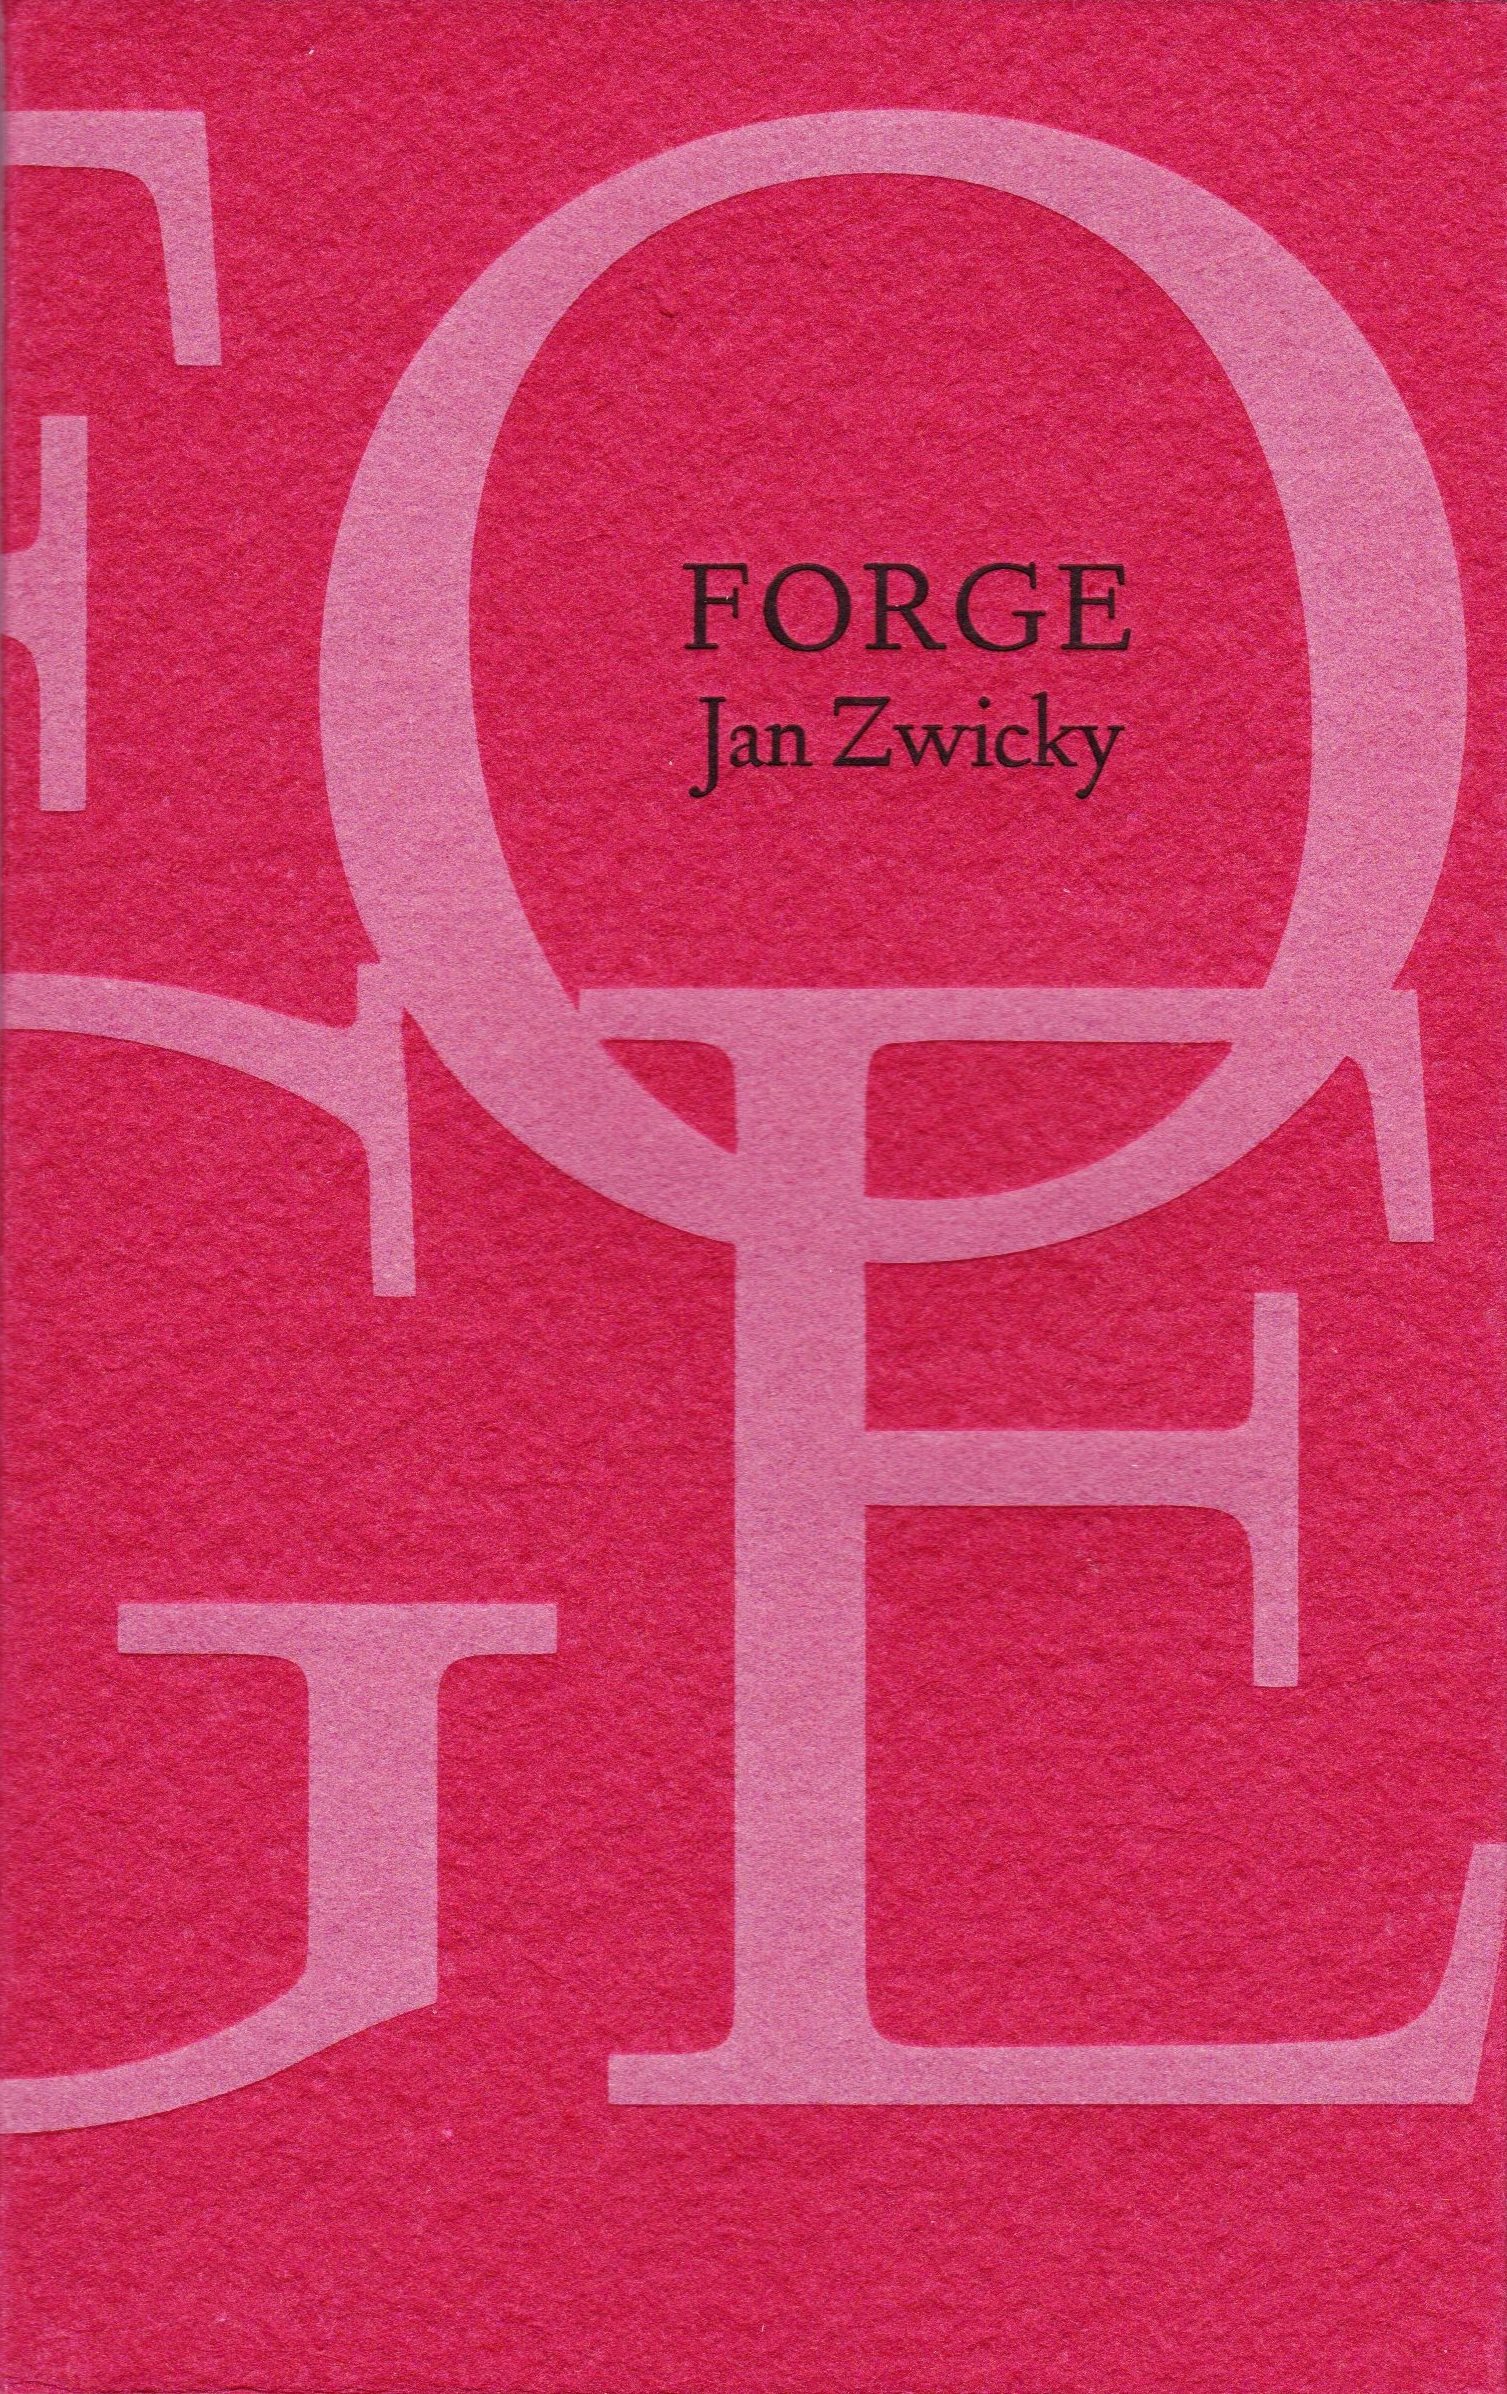 FORGE 